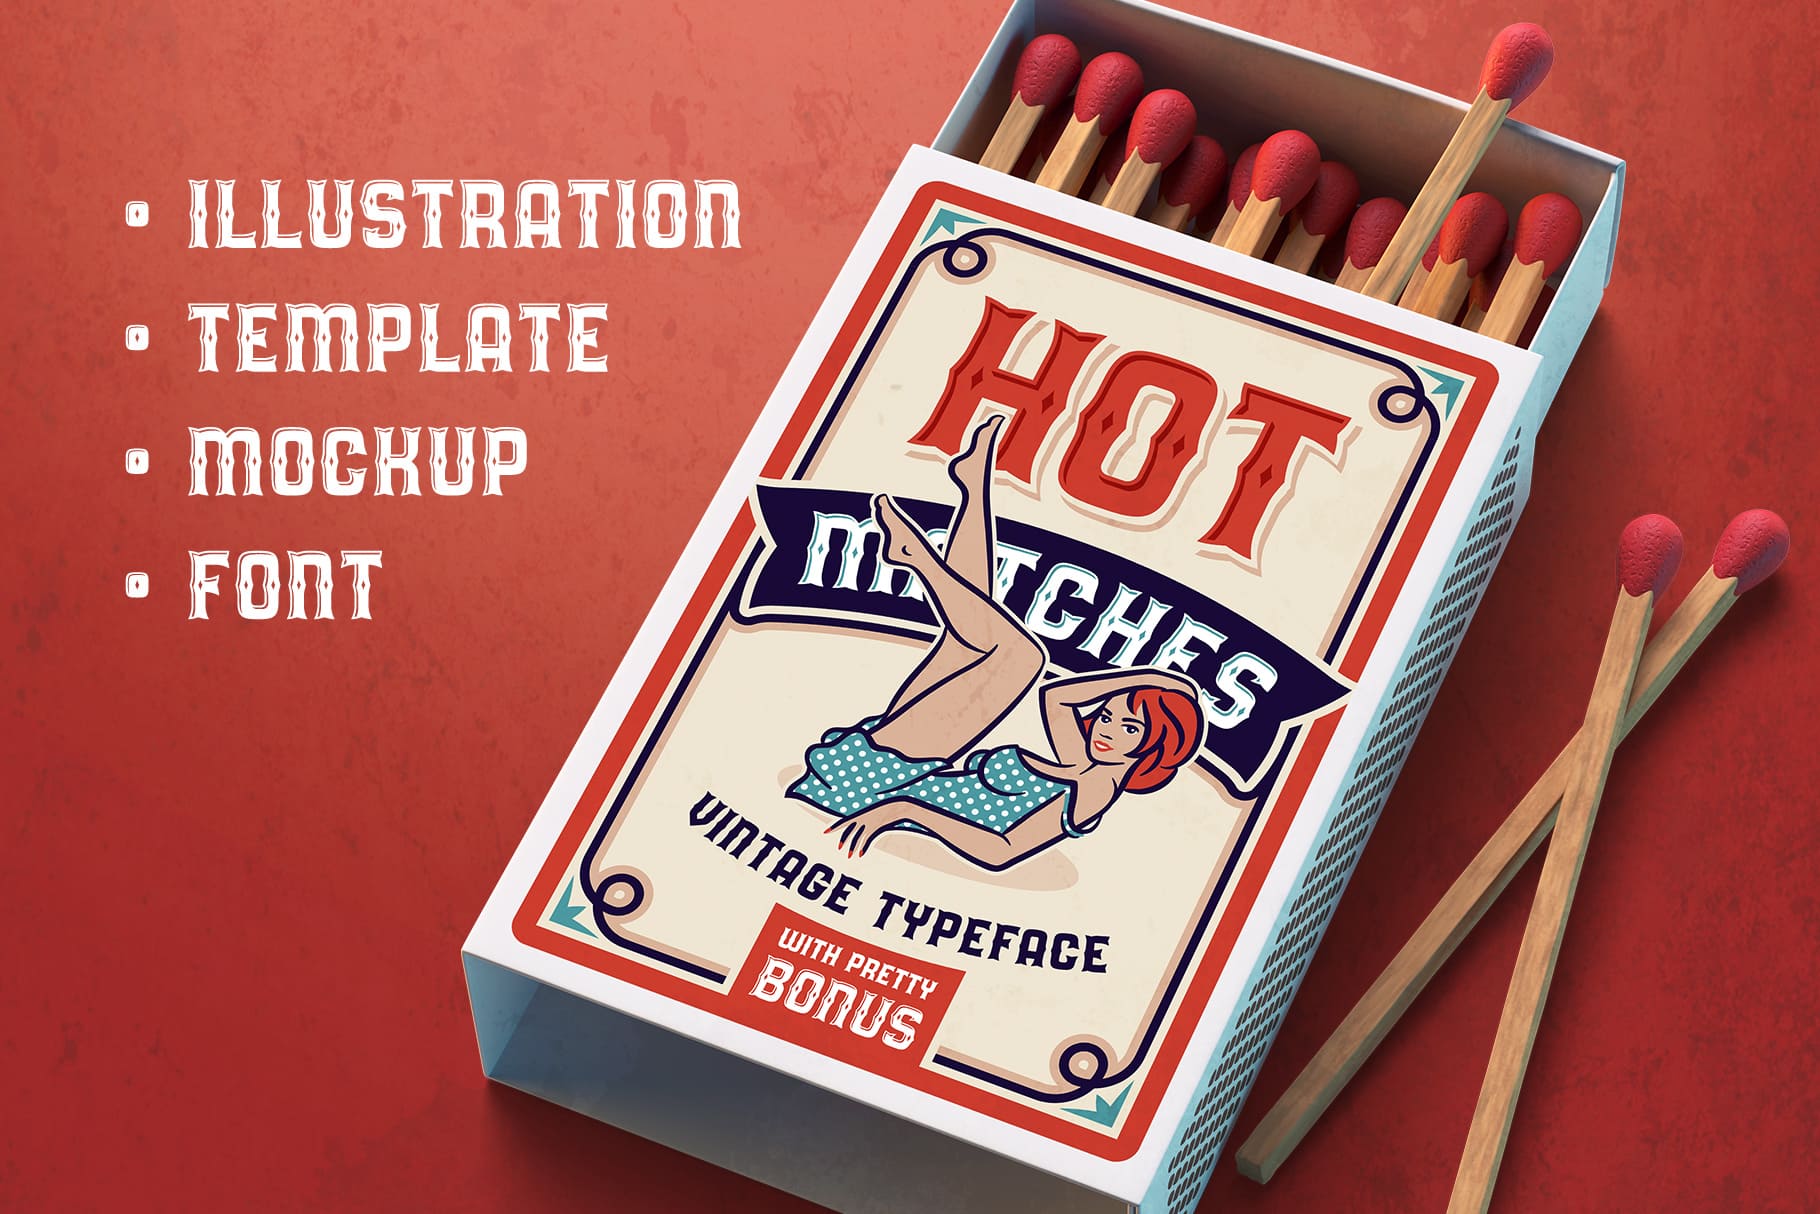 Font Mockup and Template Hot Matches Preview.